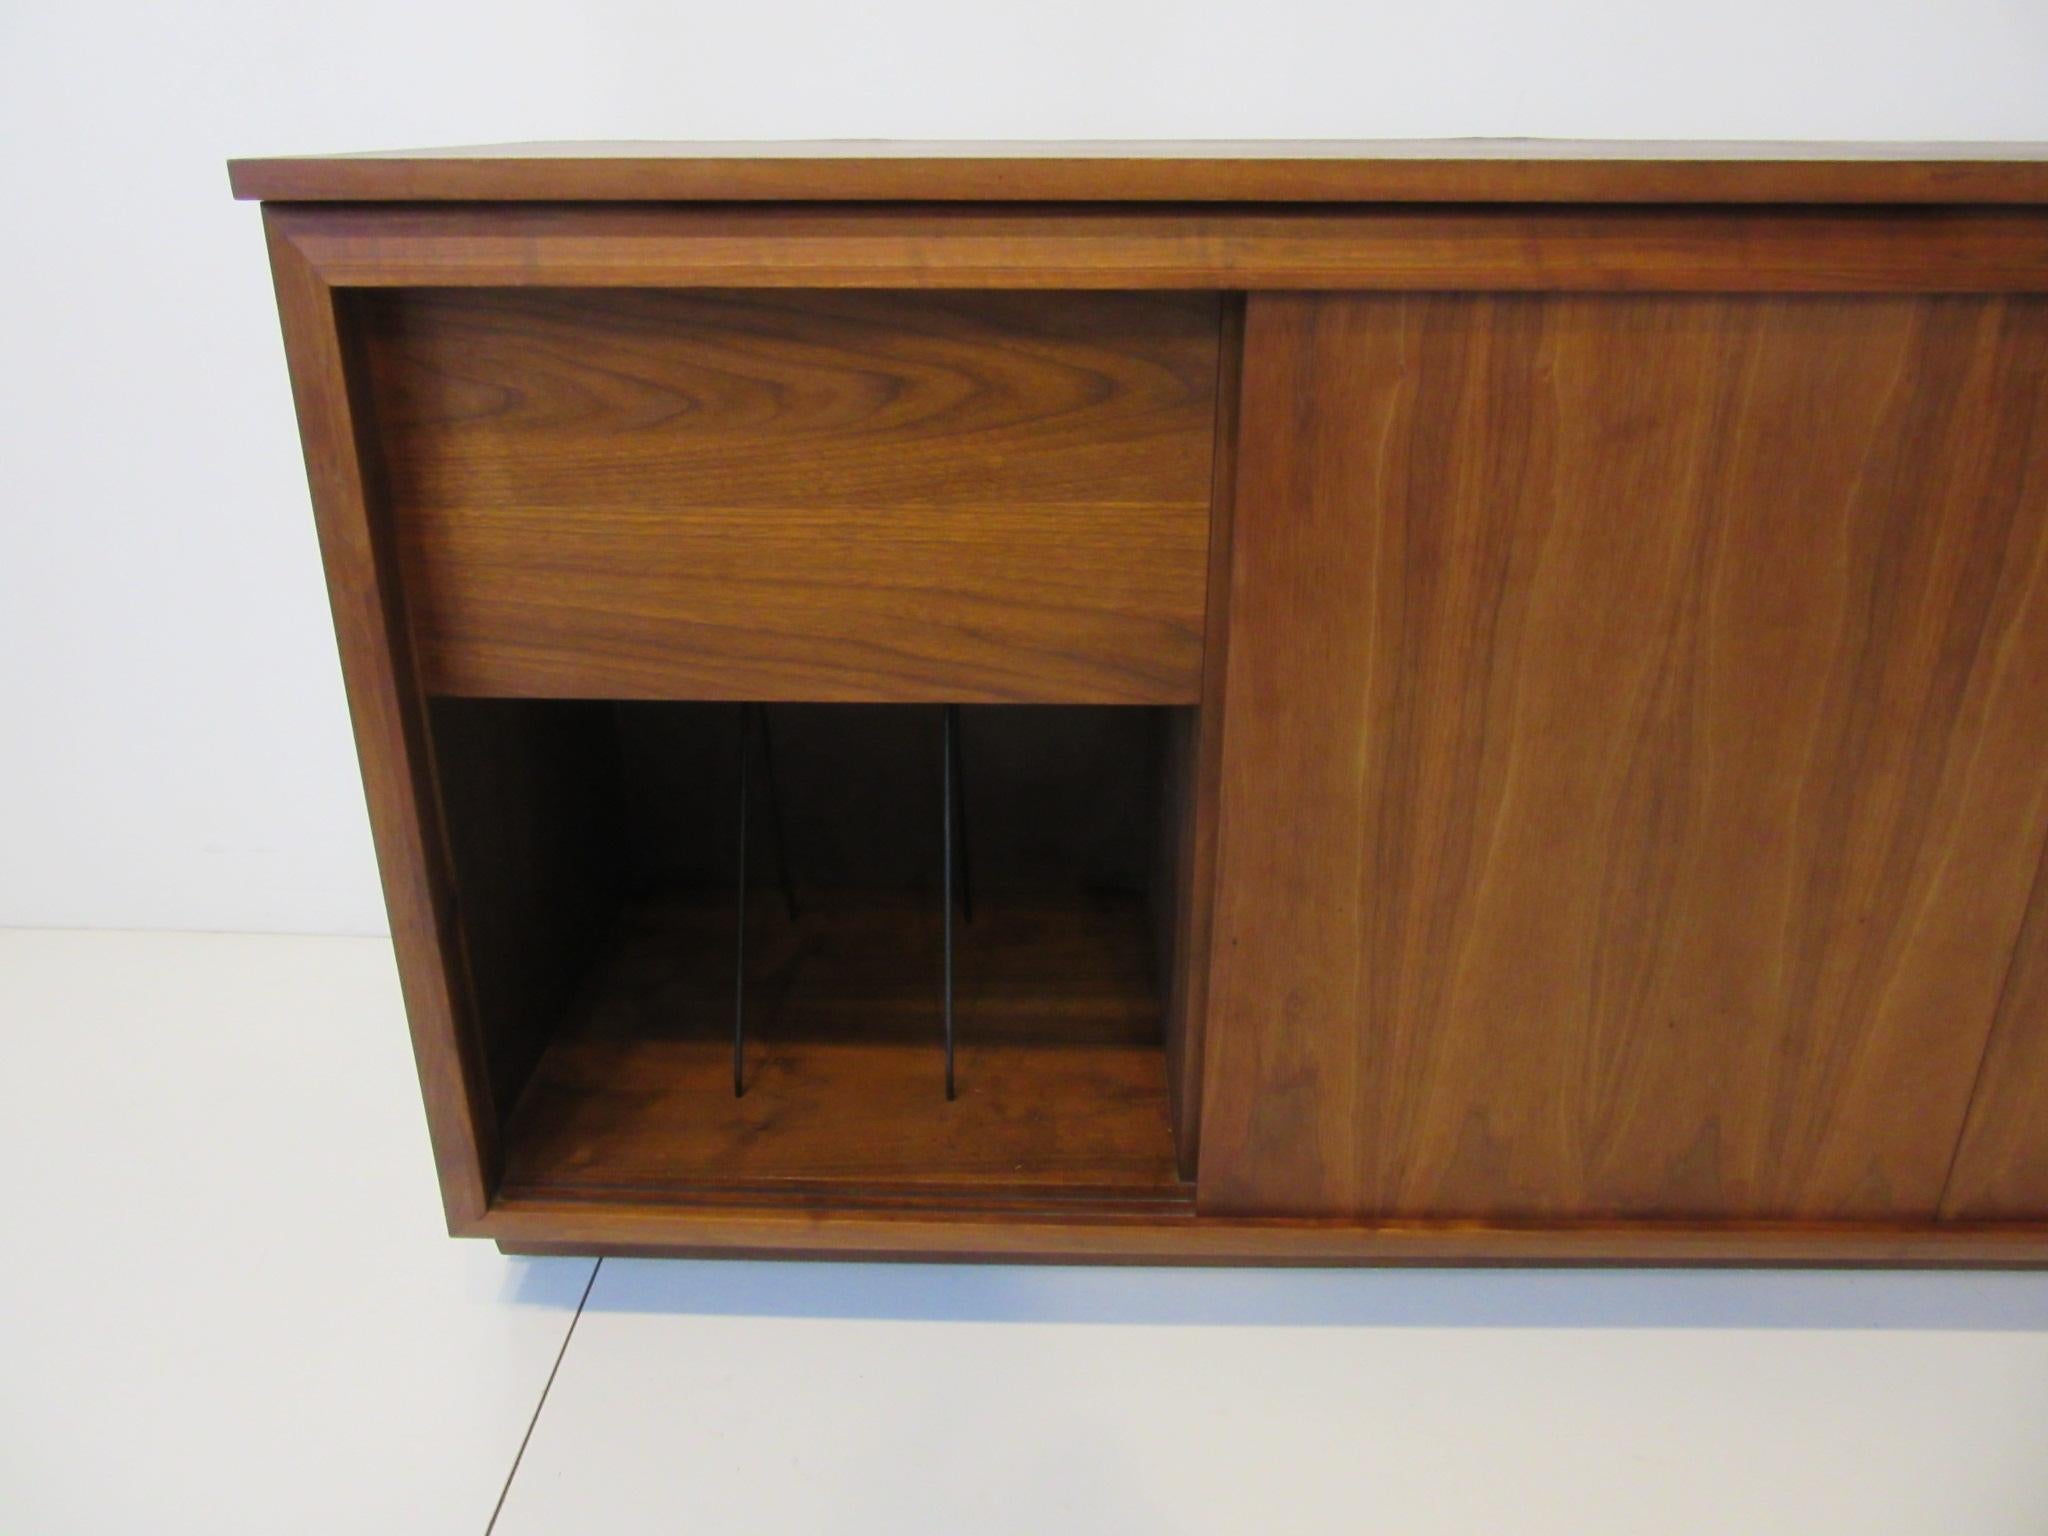 A well designed midcentury walnut stereo / record cabinet with three sliding doors each side has a built in record rack. The center section has shelves for your components and the the top flips open reveling storage or more space for other